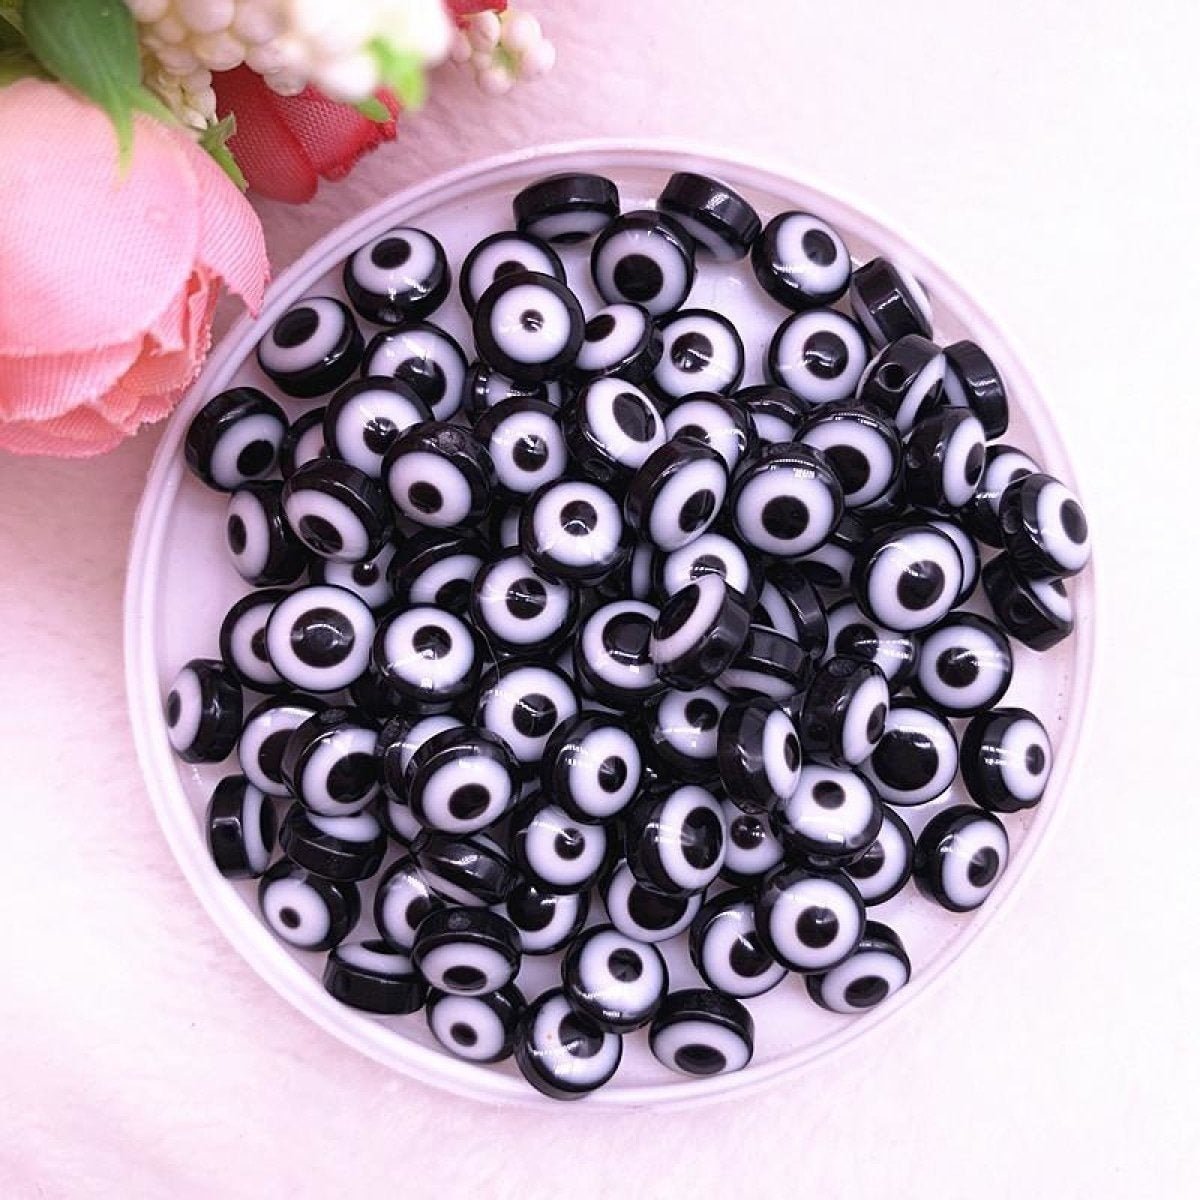 48pcs 8/10mm Oval Resin Spacer Beads Double Sided Eyes for Jewellery Making DIY Bracelet Beads Set B - Black 8mm - - Asia Sell